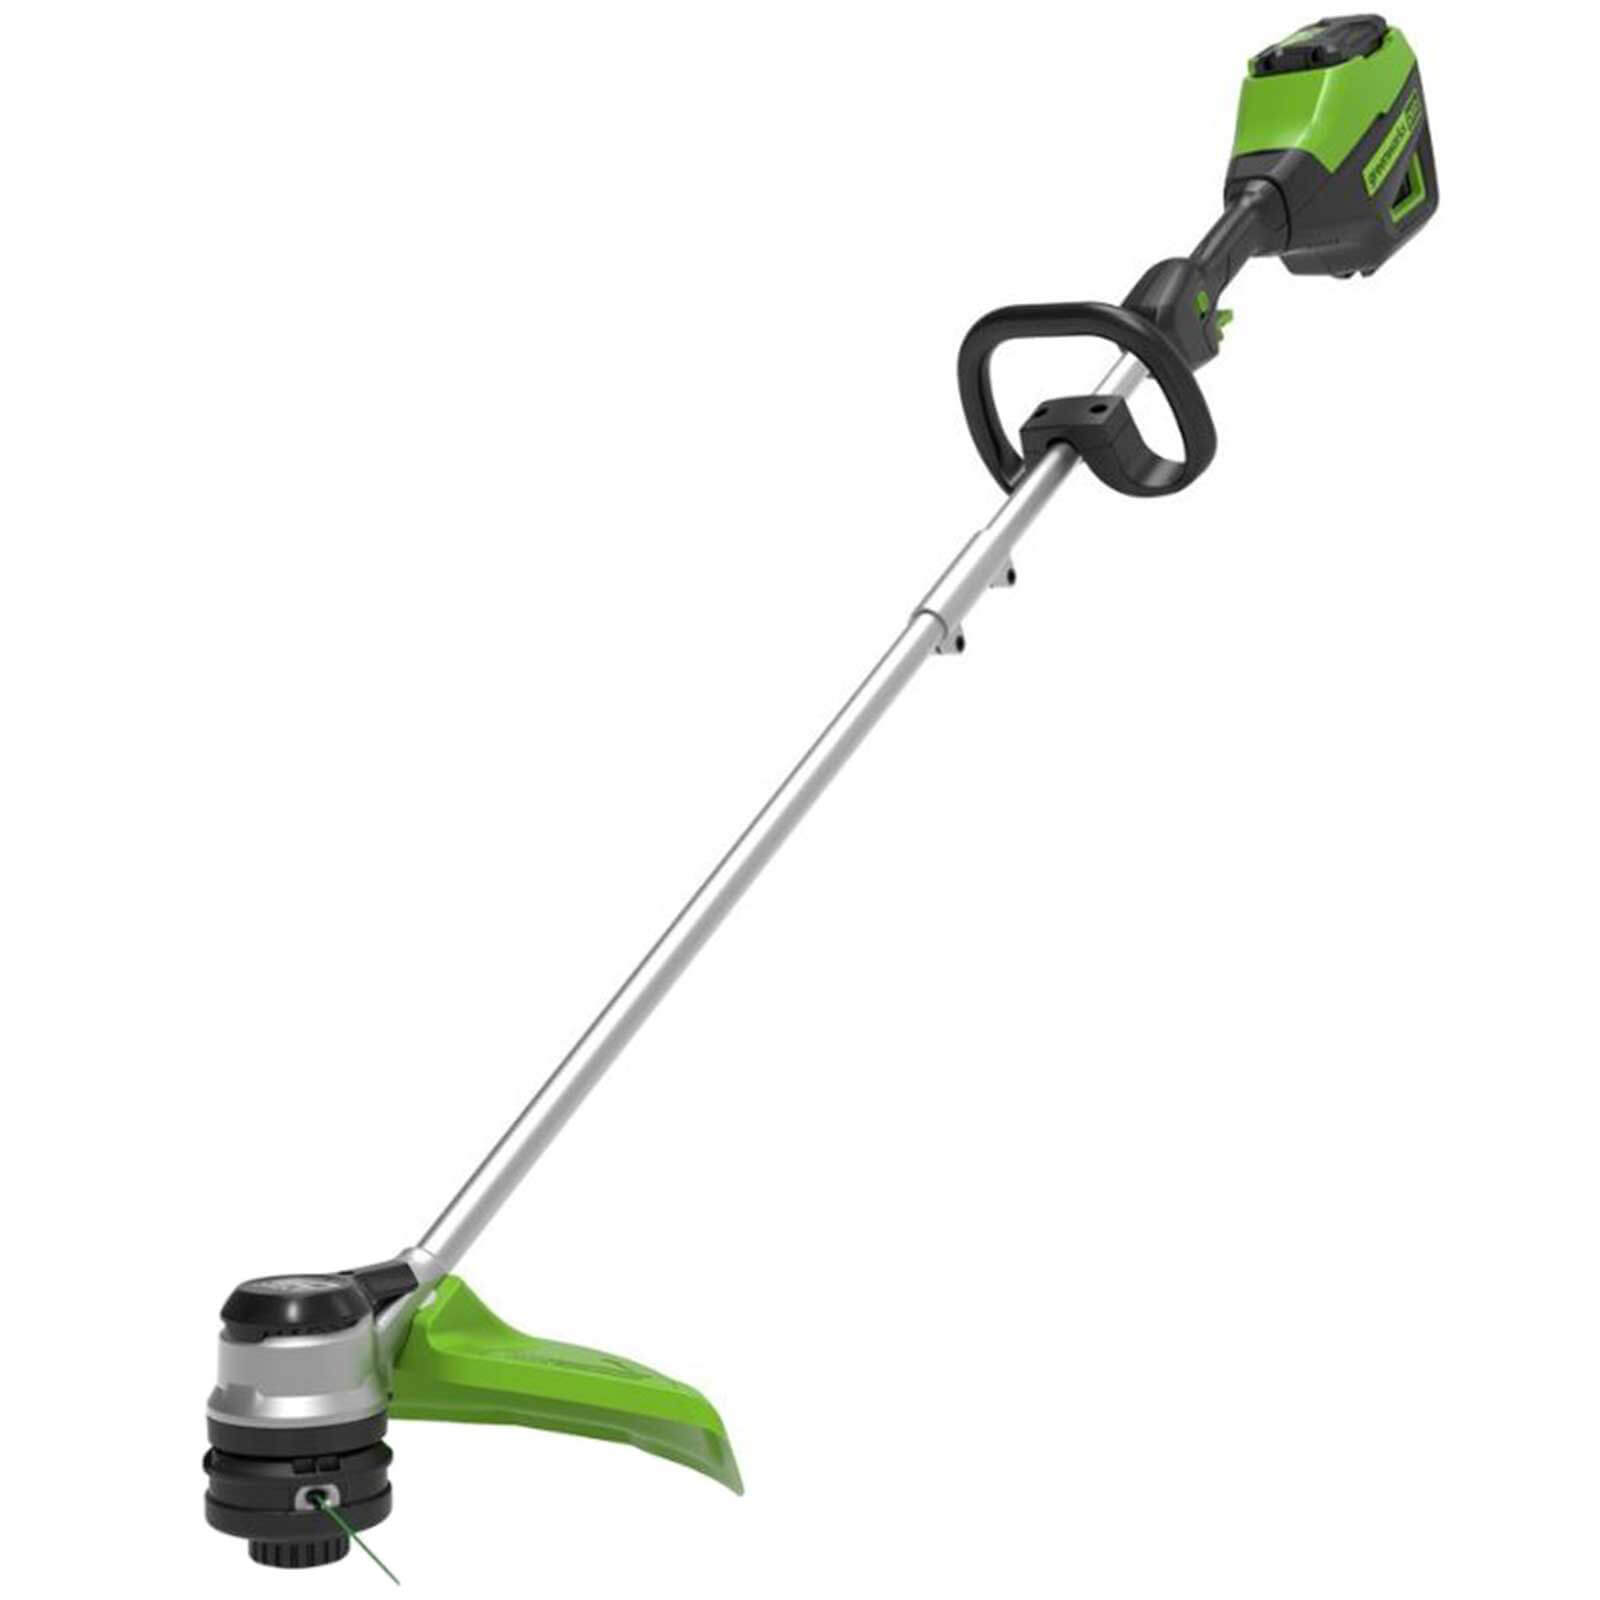 Photos - Lawn Mower Greenworks GD60BC 60v Cordless Brushless Grass Trimmer with Loop Handle No 